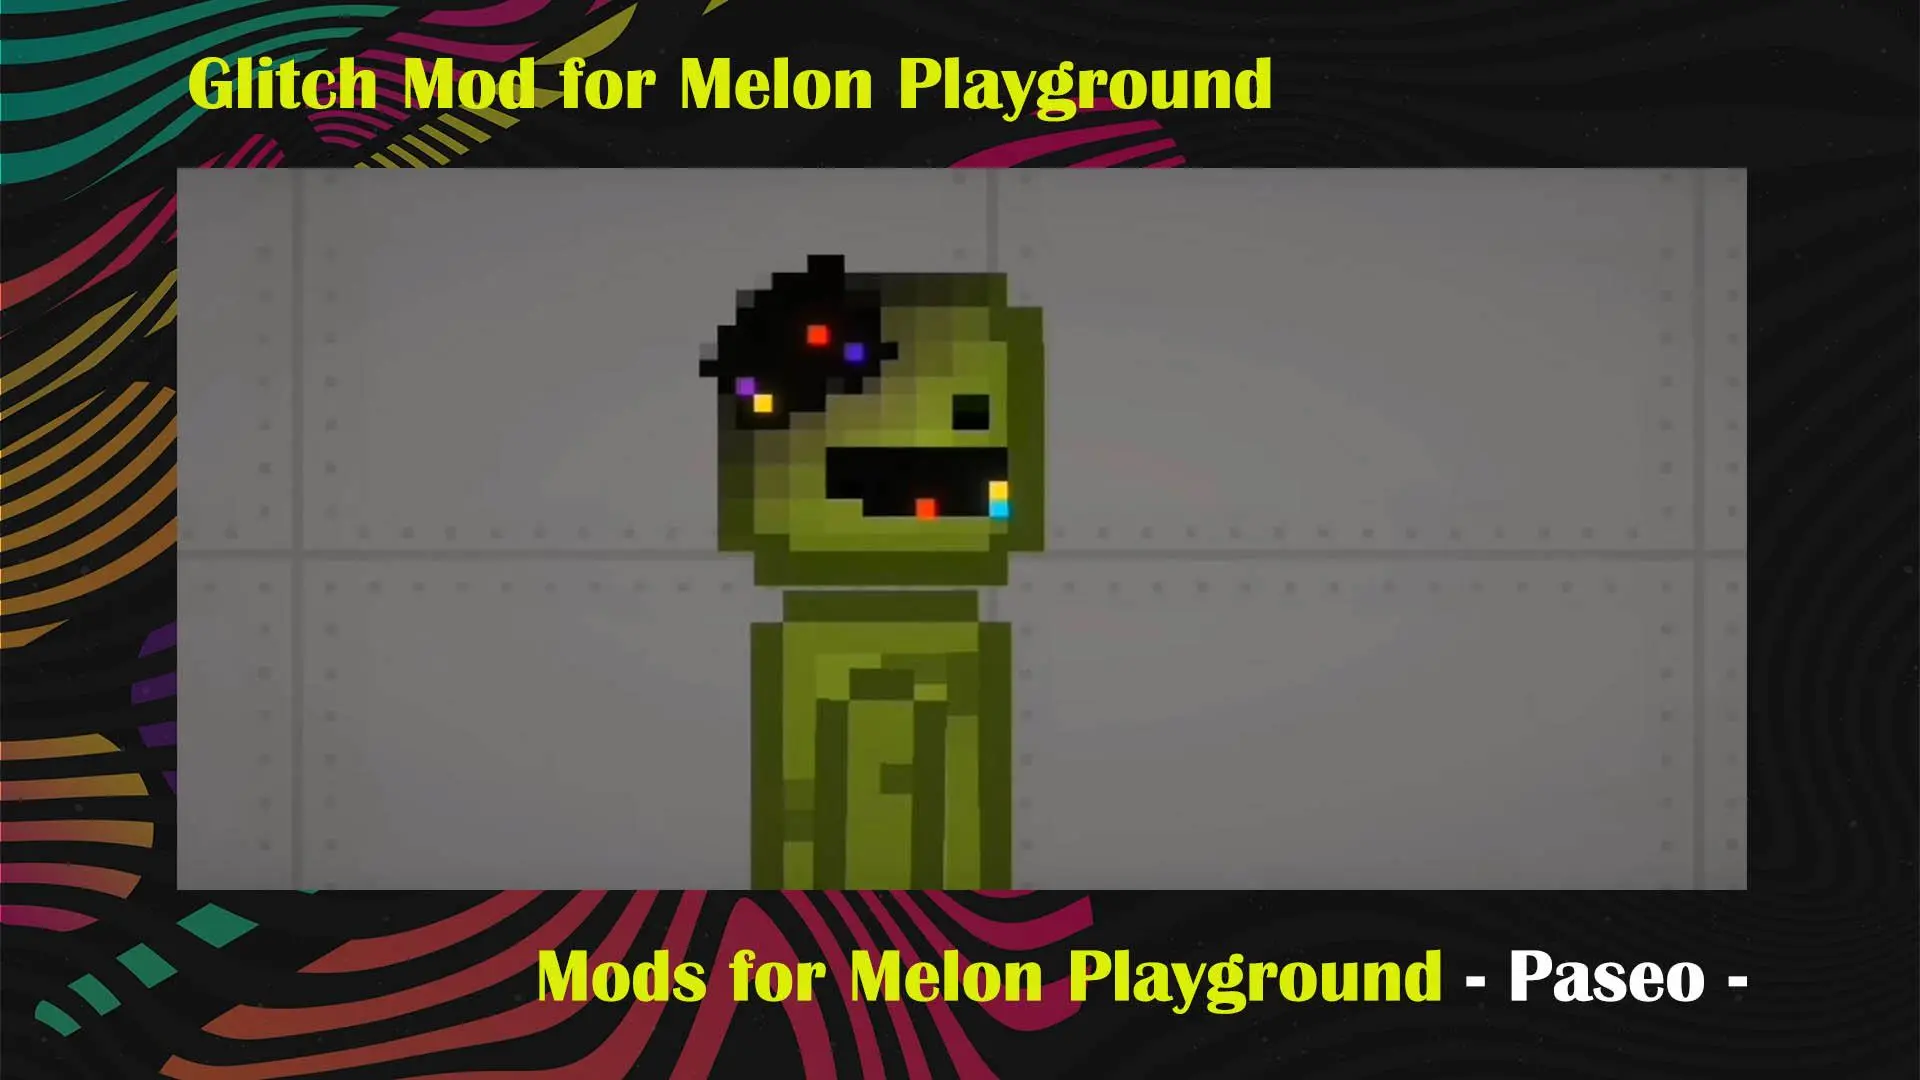 how to install mod on melon playground 